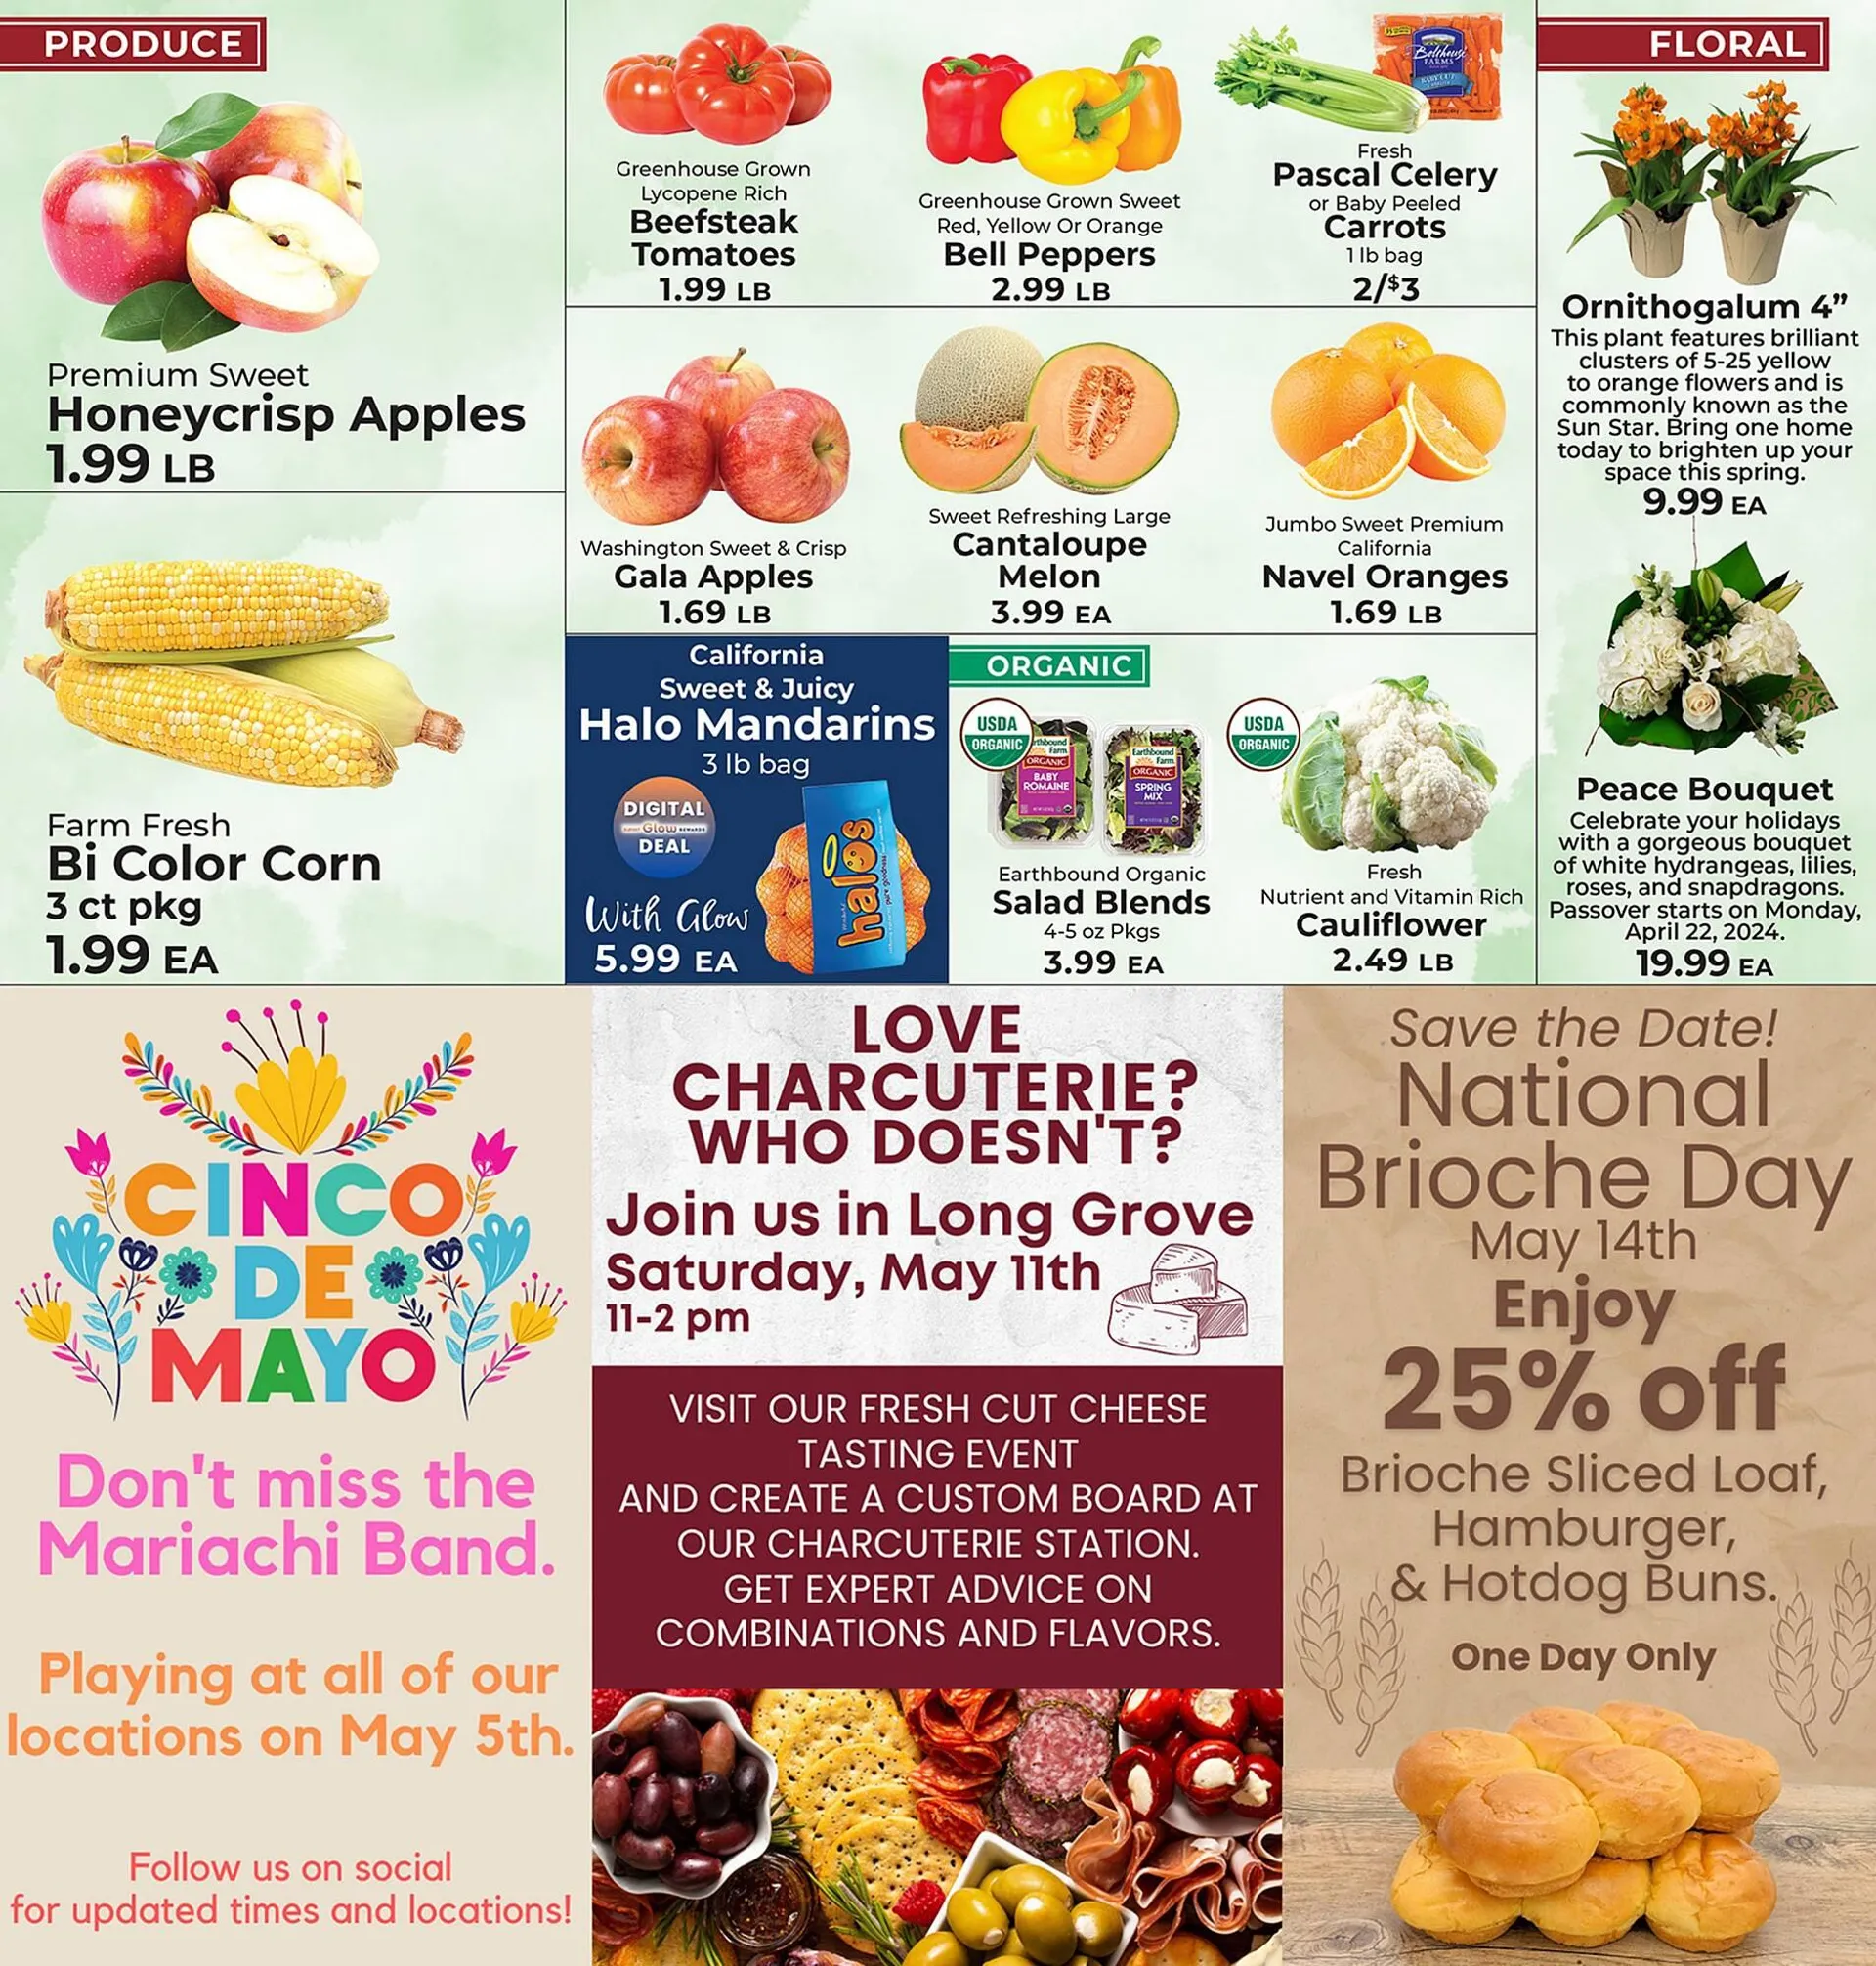 Sunset Foods Weekly Ad - 4